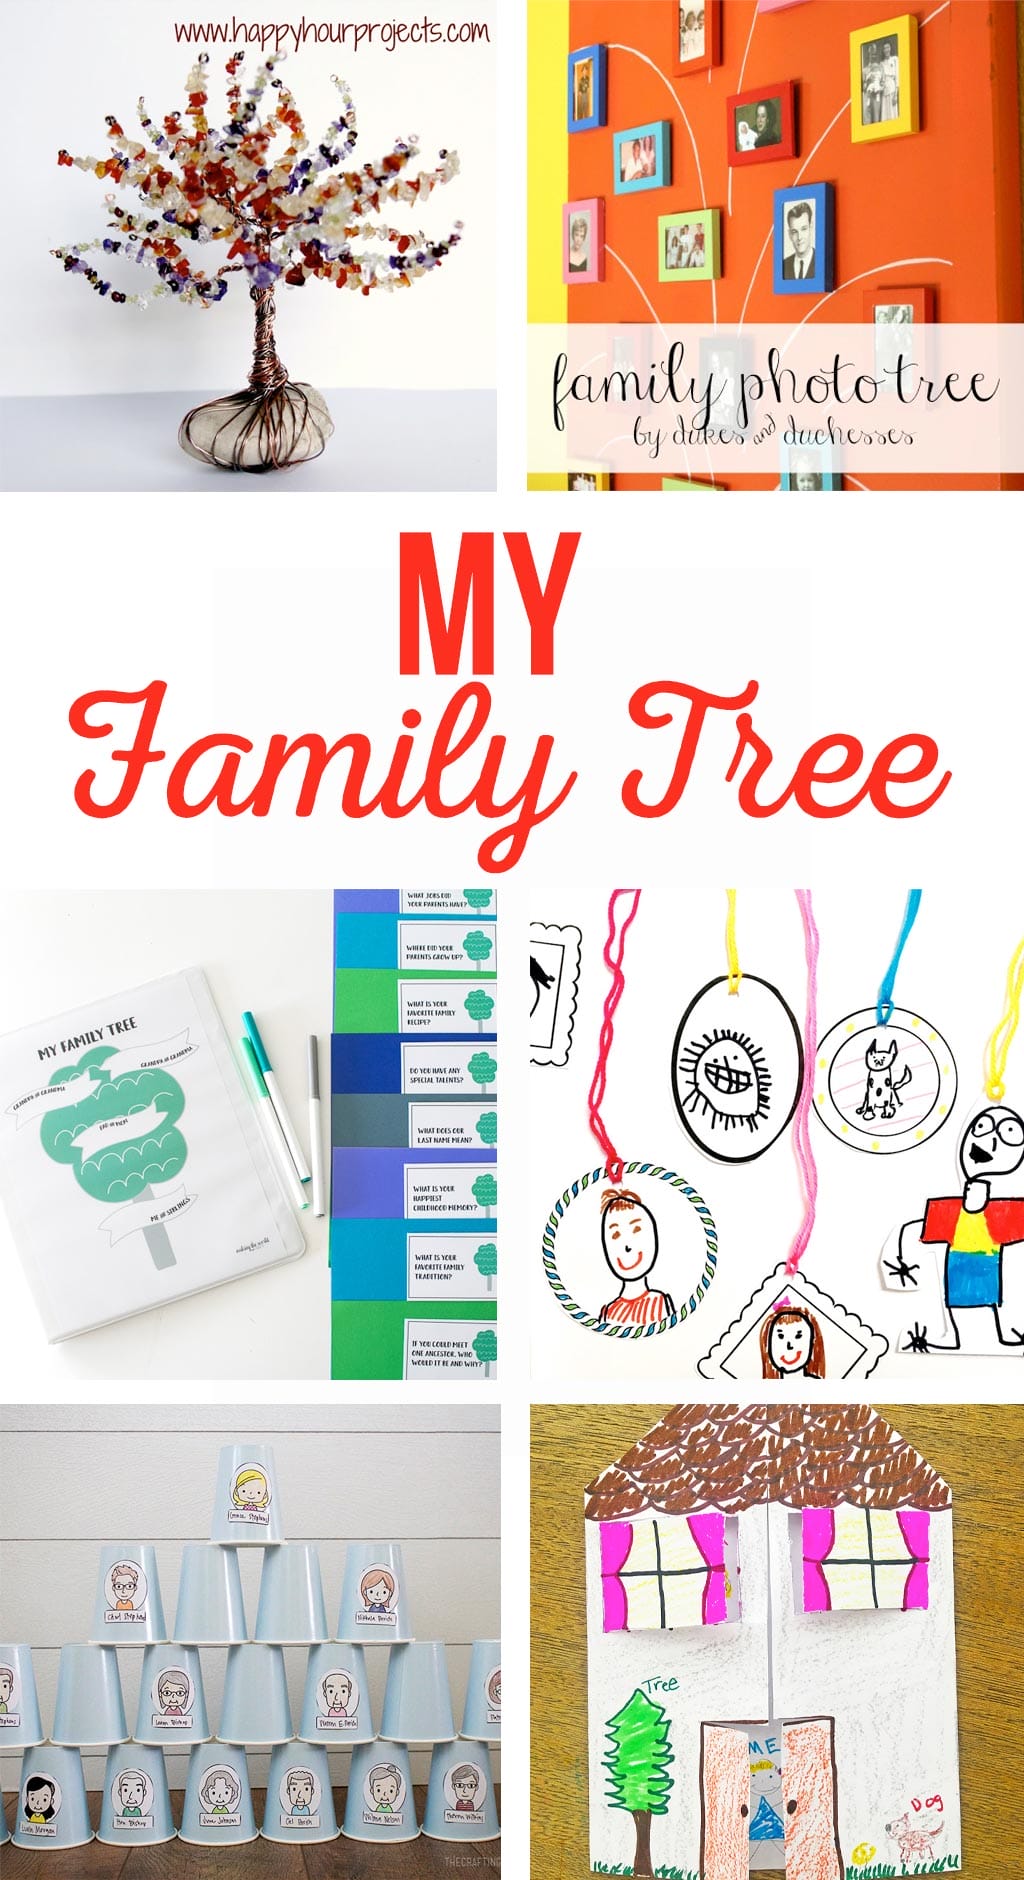 My Family Tree Crafts | Printable crafts and activities to help kids learn about their family tree. A fun way to get kids excited about genealogy! #familytree #kidscrafts #printables #genealogy